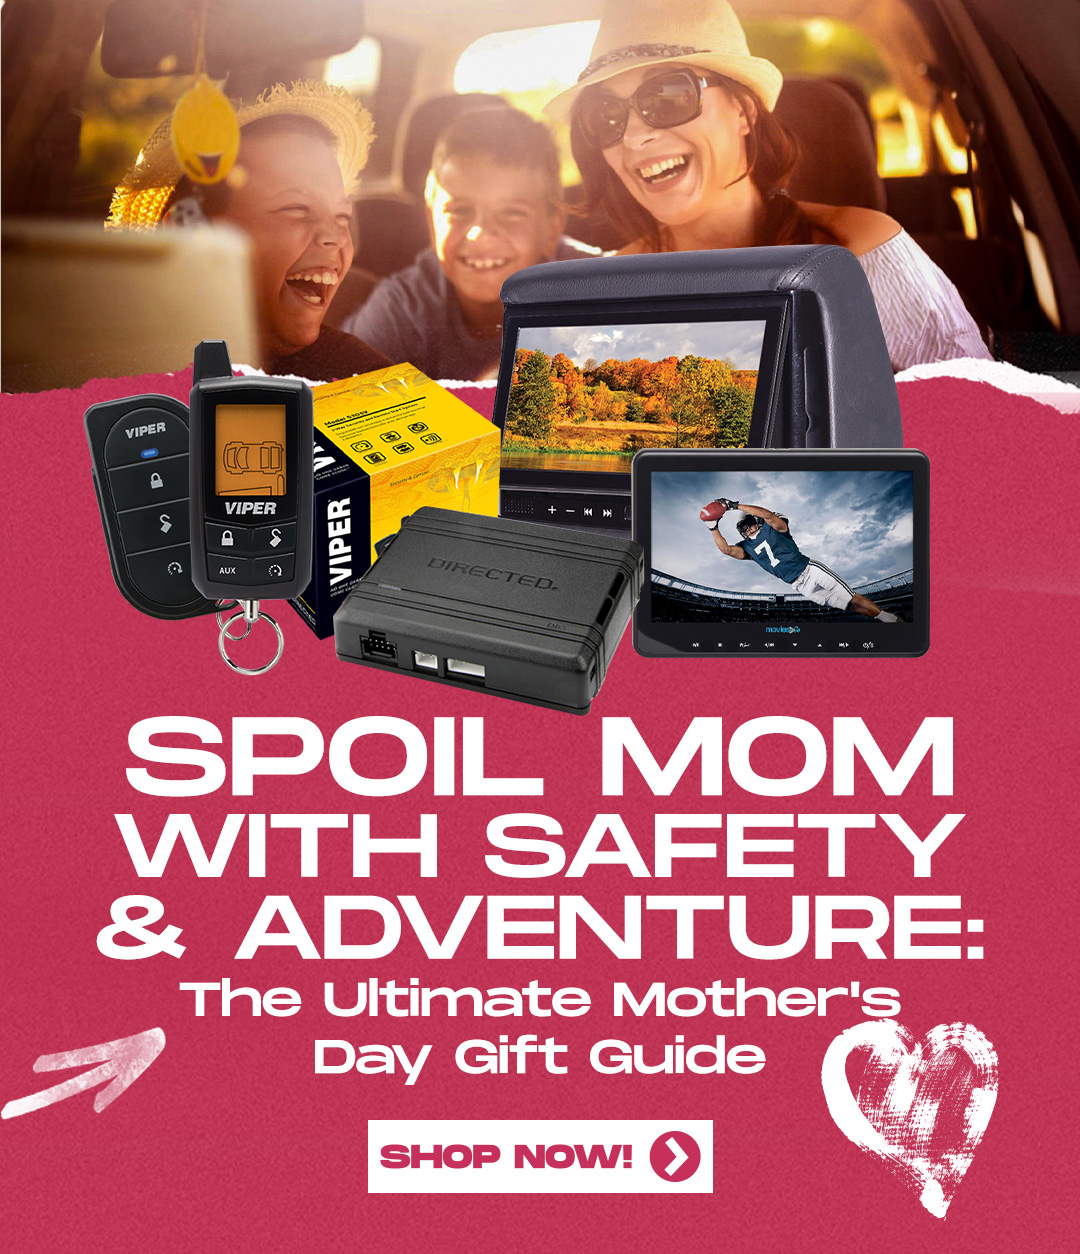 Spoil Mom with Safety & Adventure: The Ultimate Mother's Day Gift Guide